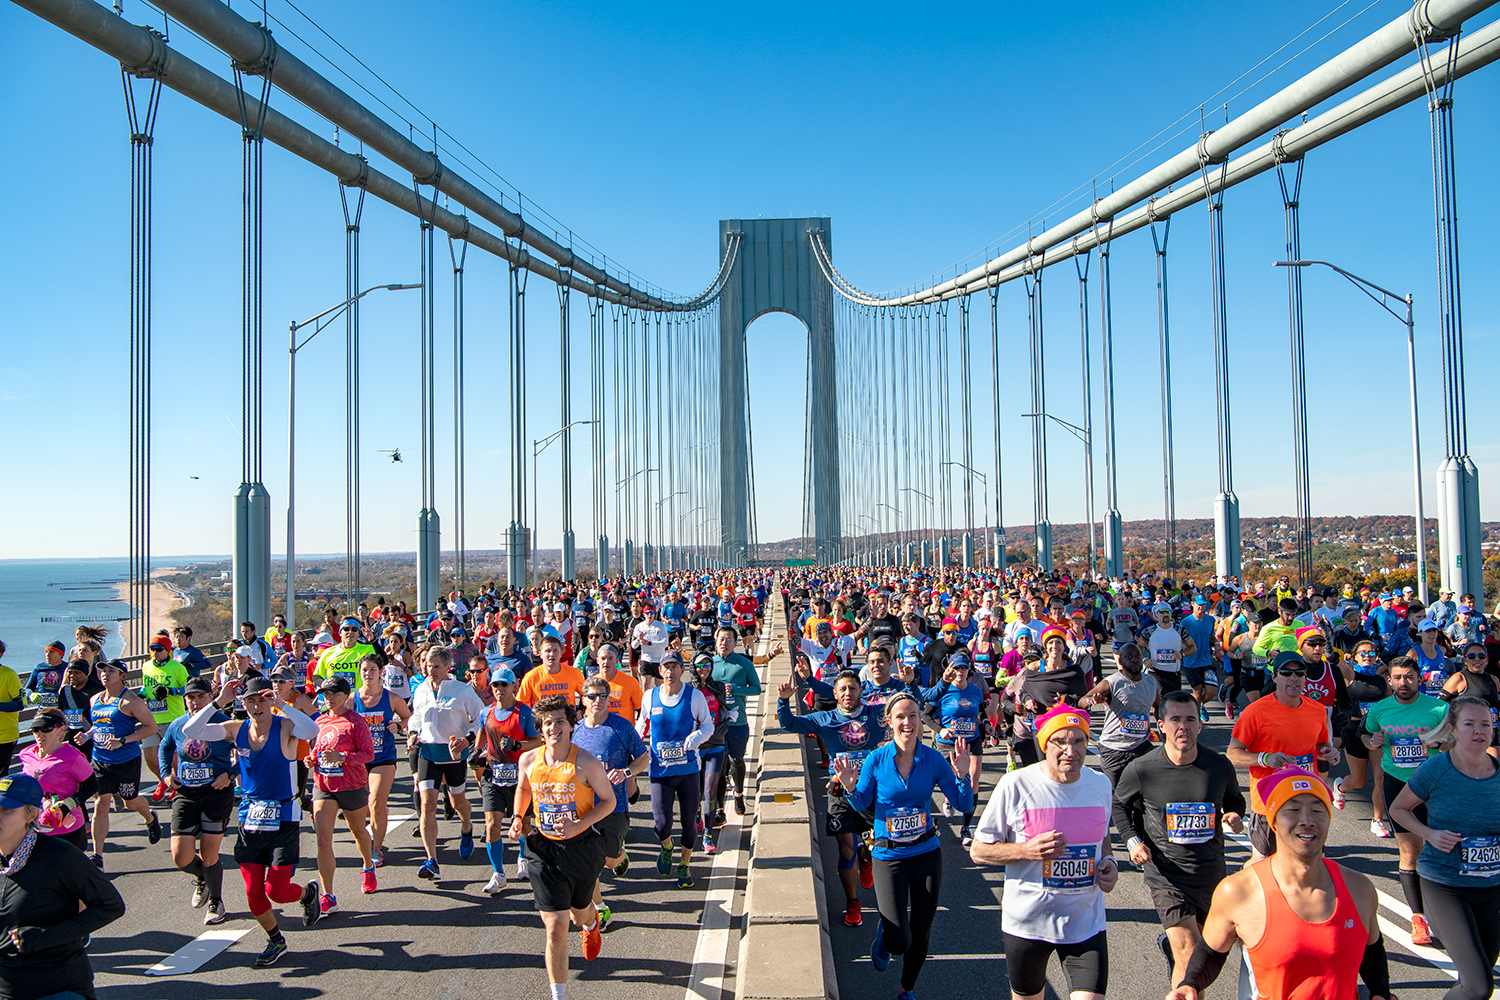 So You’re a Trivia Expert? Prove It by Answering All 22 of These True/False Questions Correctly New York City Marathon